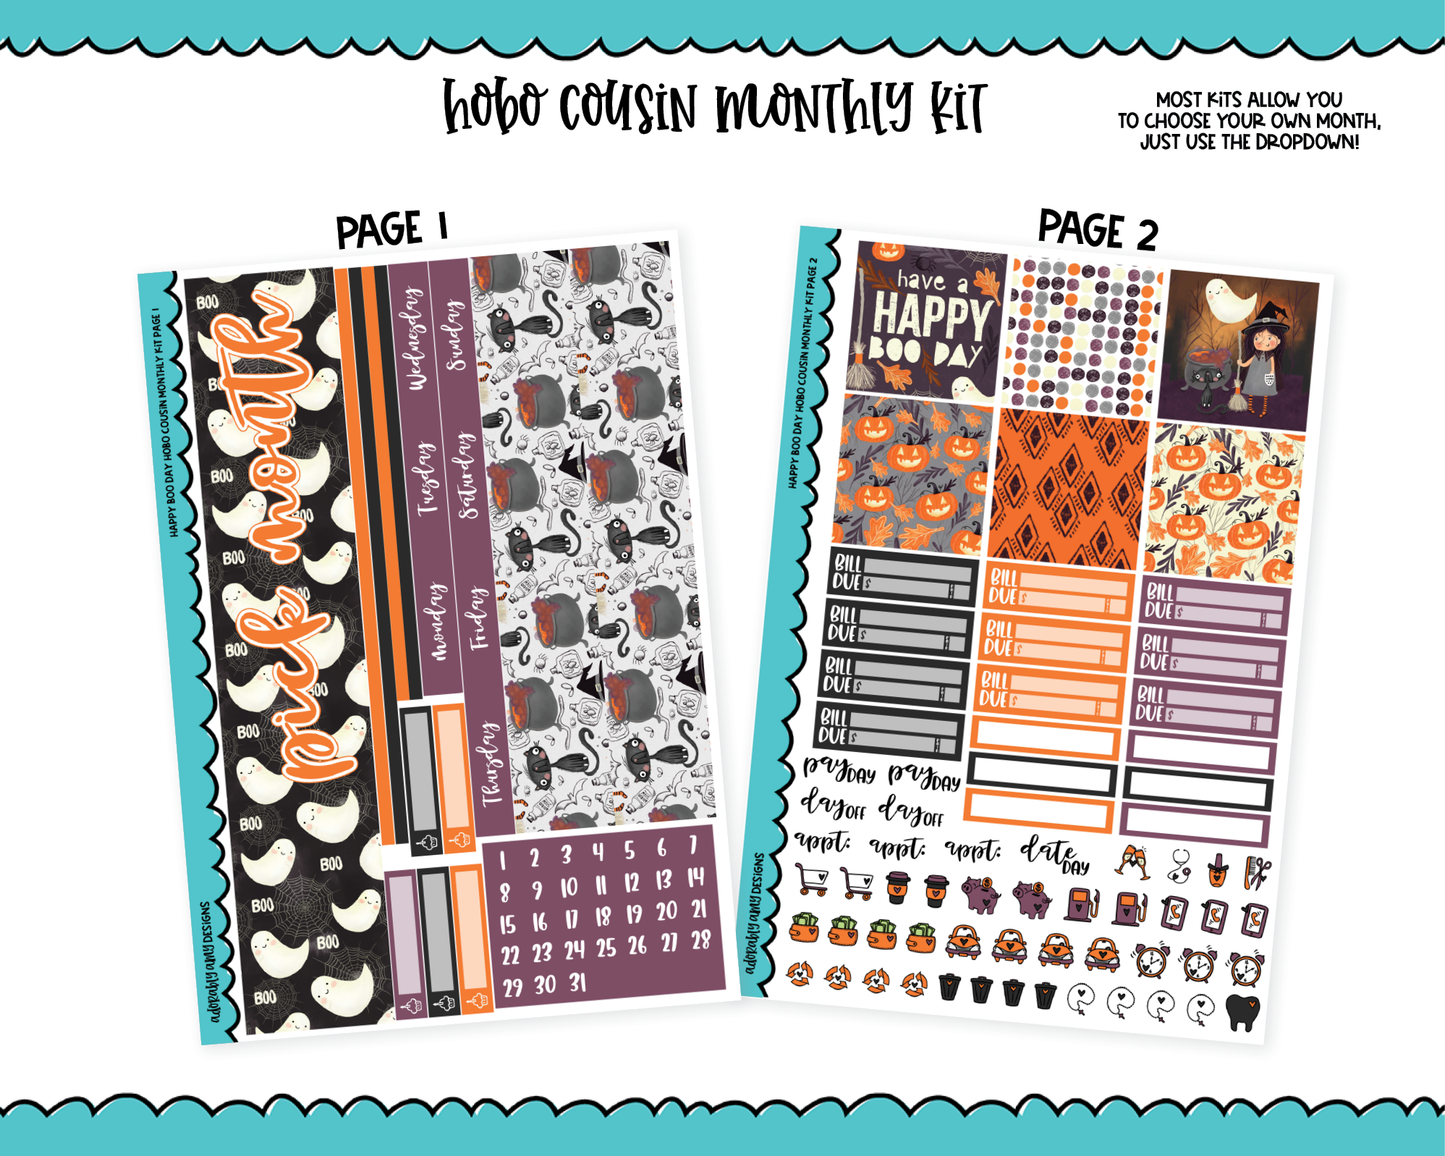 Hobonichi Cousin Monthly Pick Your Month Happy Boo Day Halloween Themed Planner Sticker Kit for Hobo Cousin or Similar Planners